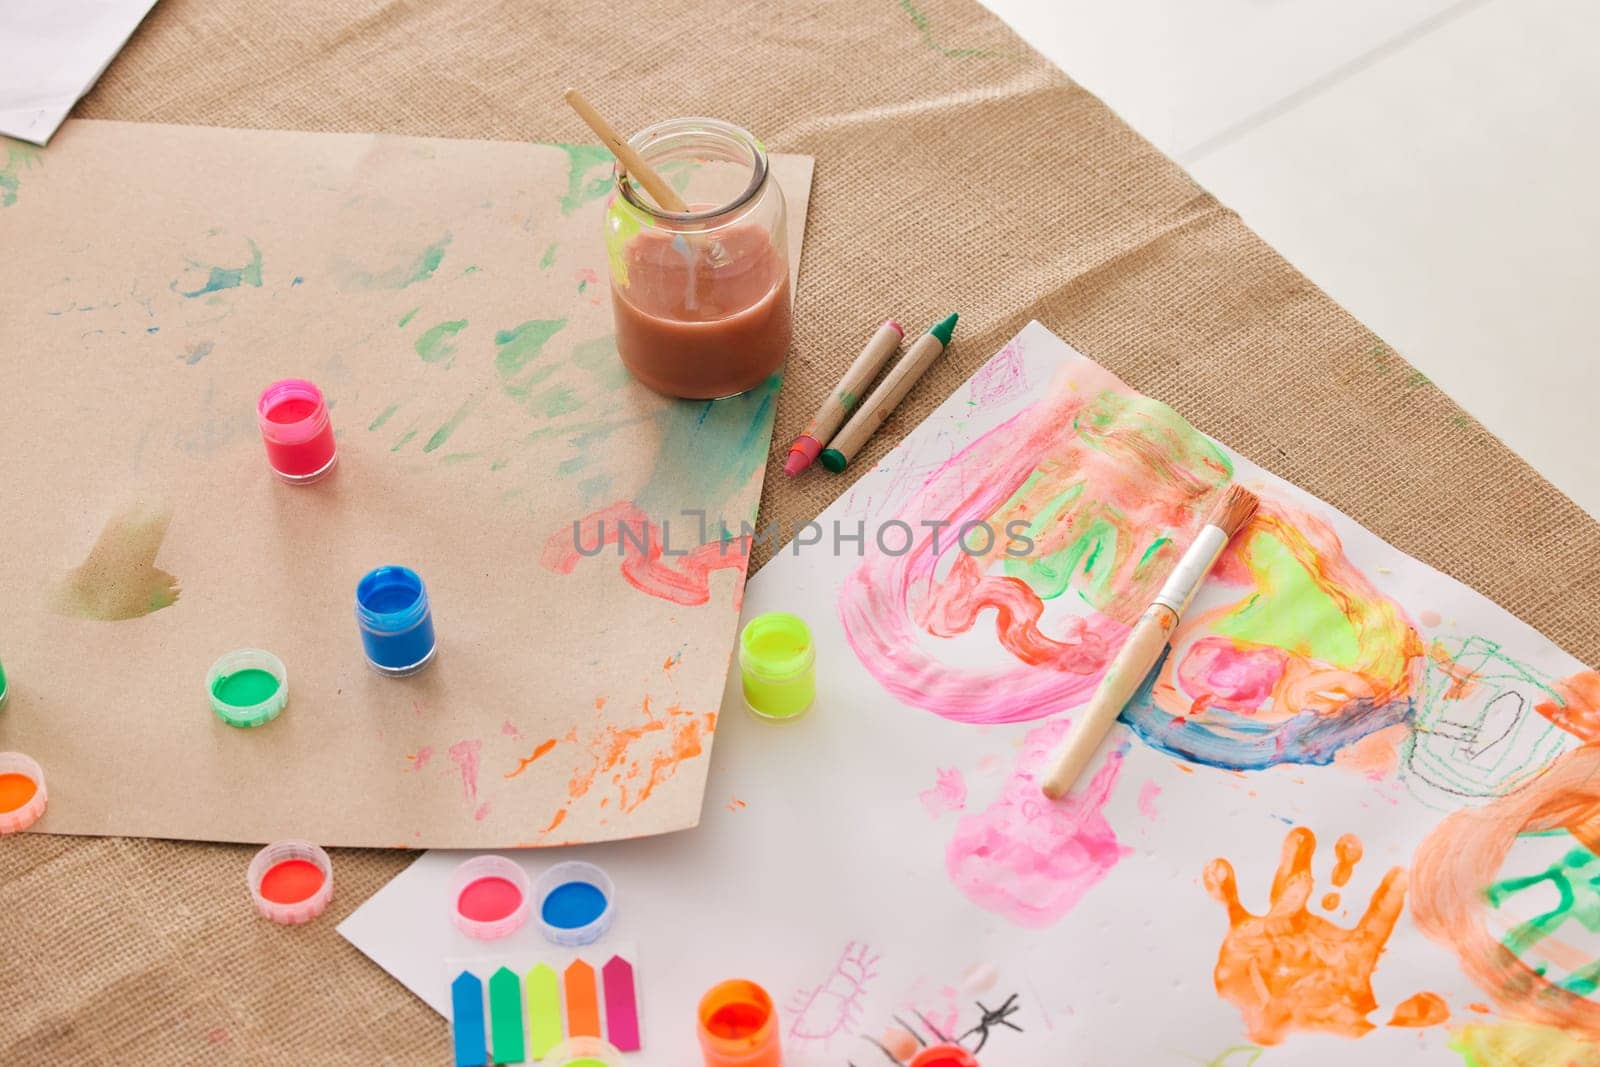 Paint, paper and art project in classroom, watercolor and brush with supplies for creativity. Education, learning and craft workspace, artwork and stationary for fun with a canvas in kindergarten.